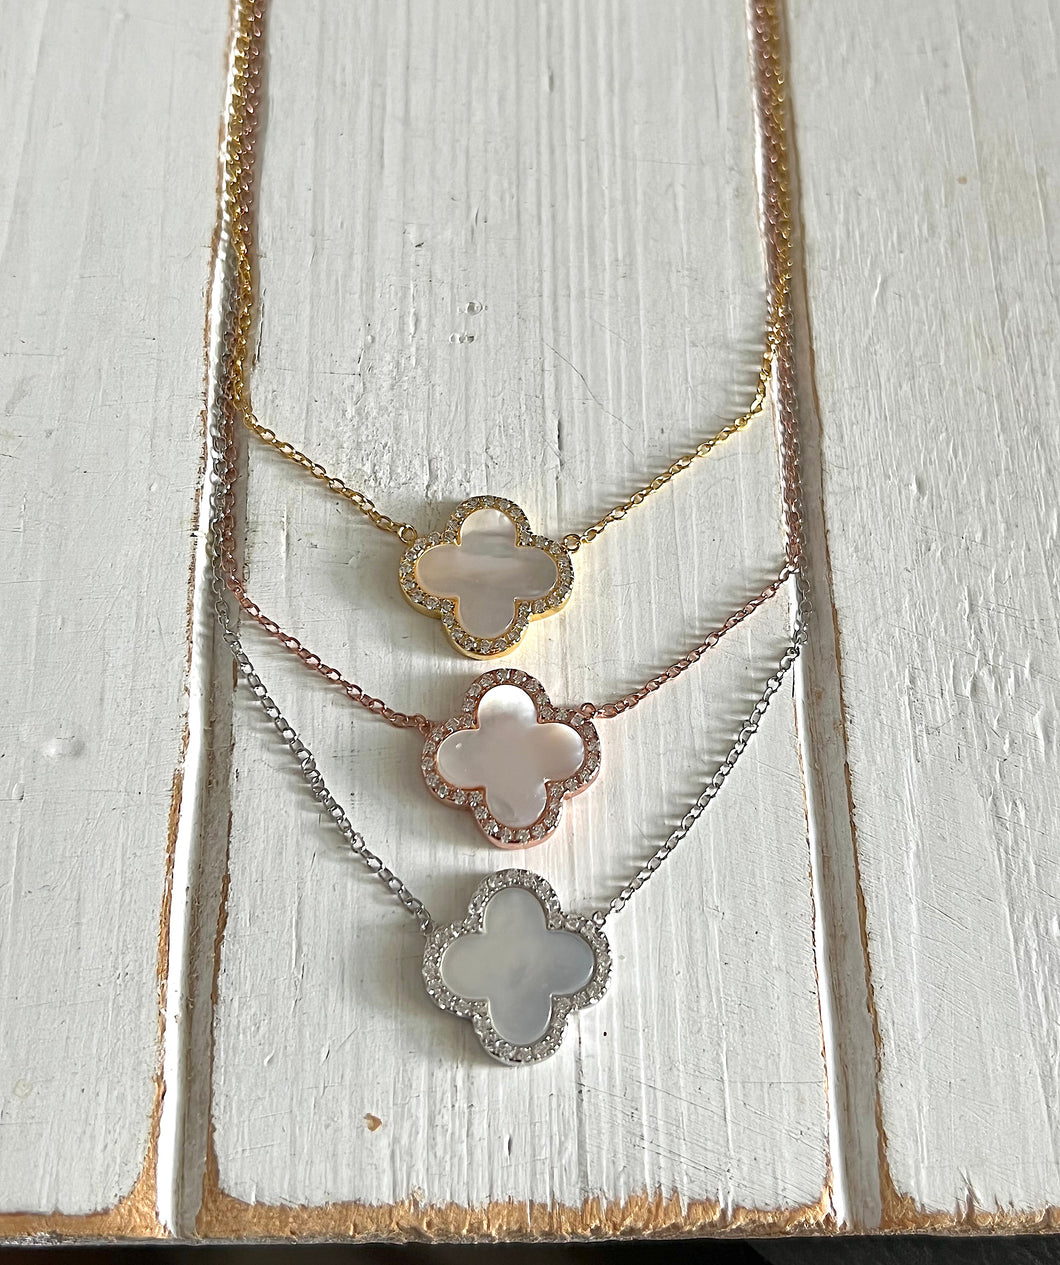 Clover necklace with Pearl